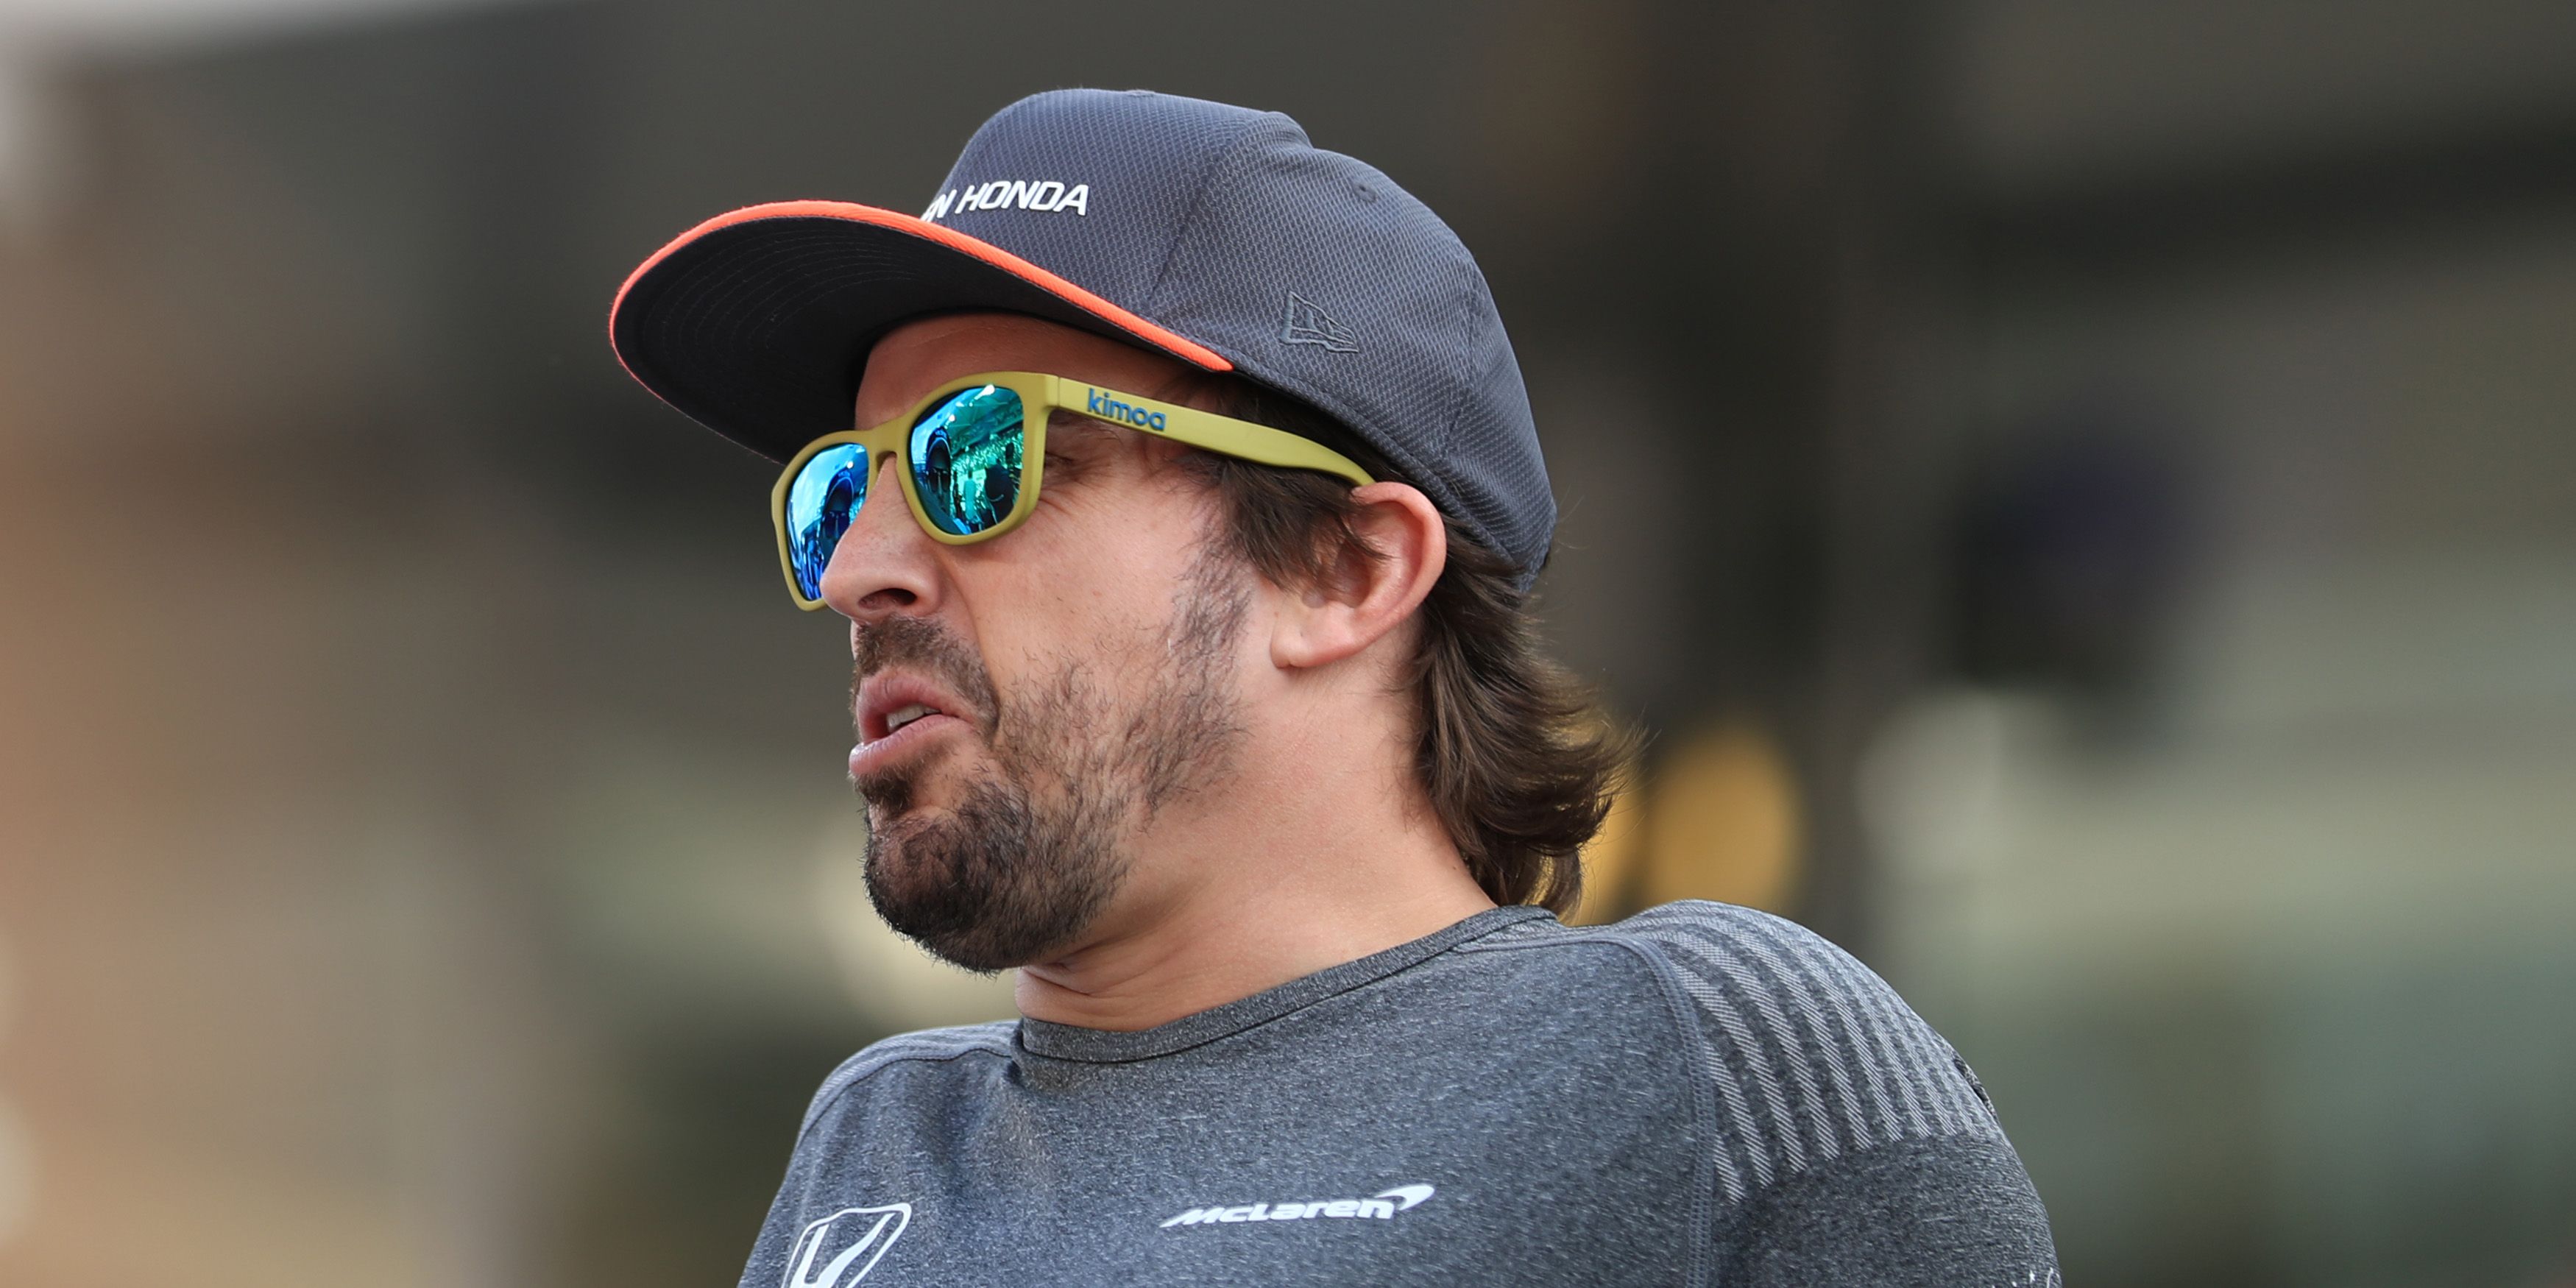 Fernando Alonso Is Now Teasing Us About the Rumor He's Dating Taylor Swift